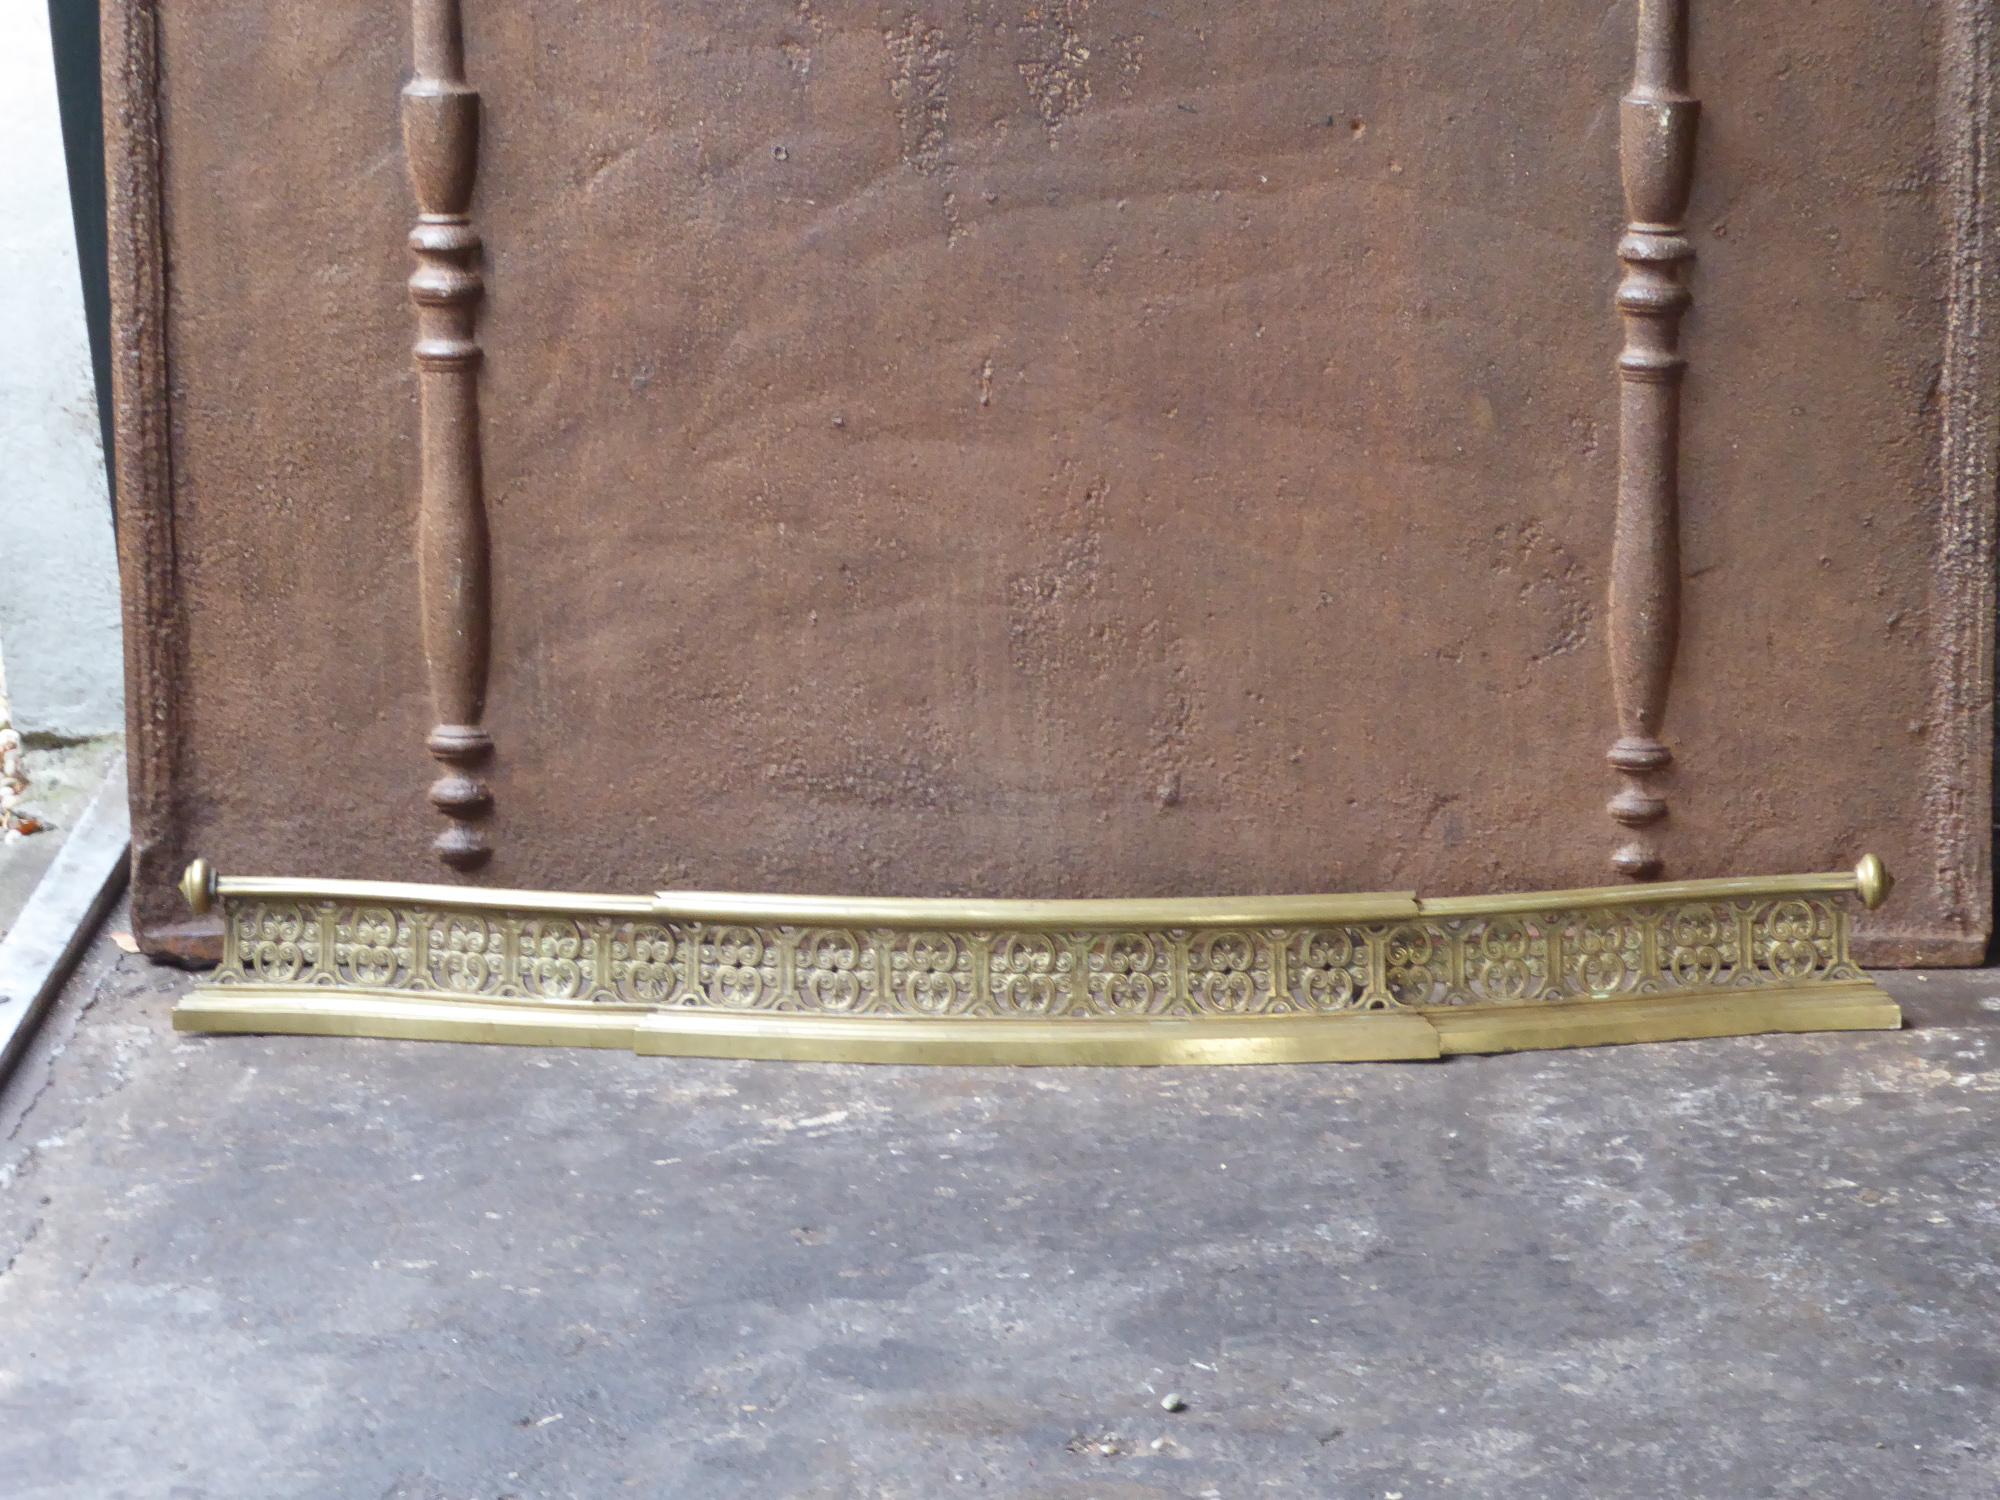 19th century English Victorian fireplace fender. The fender is made of brass. The fender is in a good condition and is fully functional.